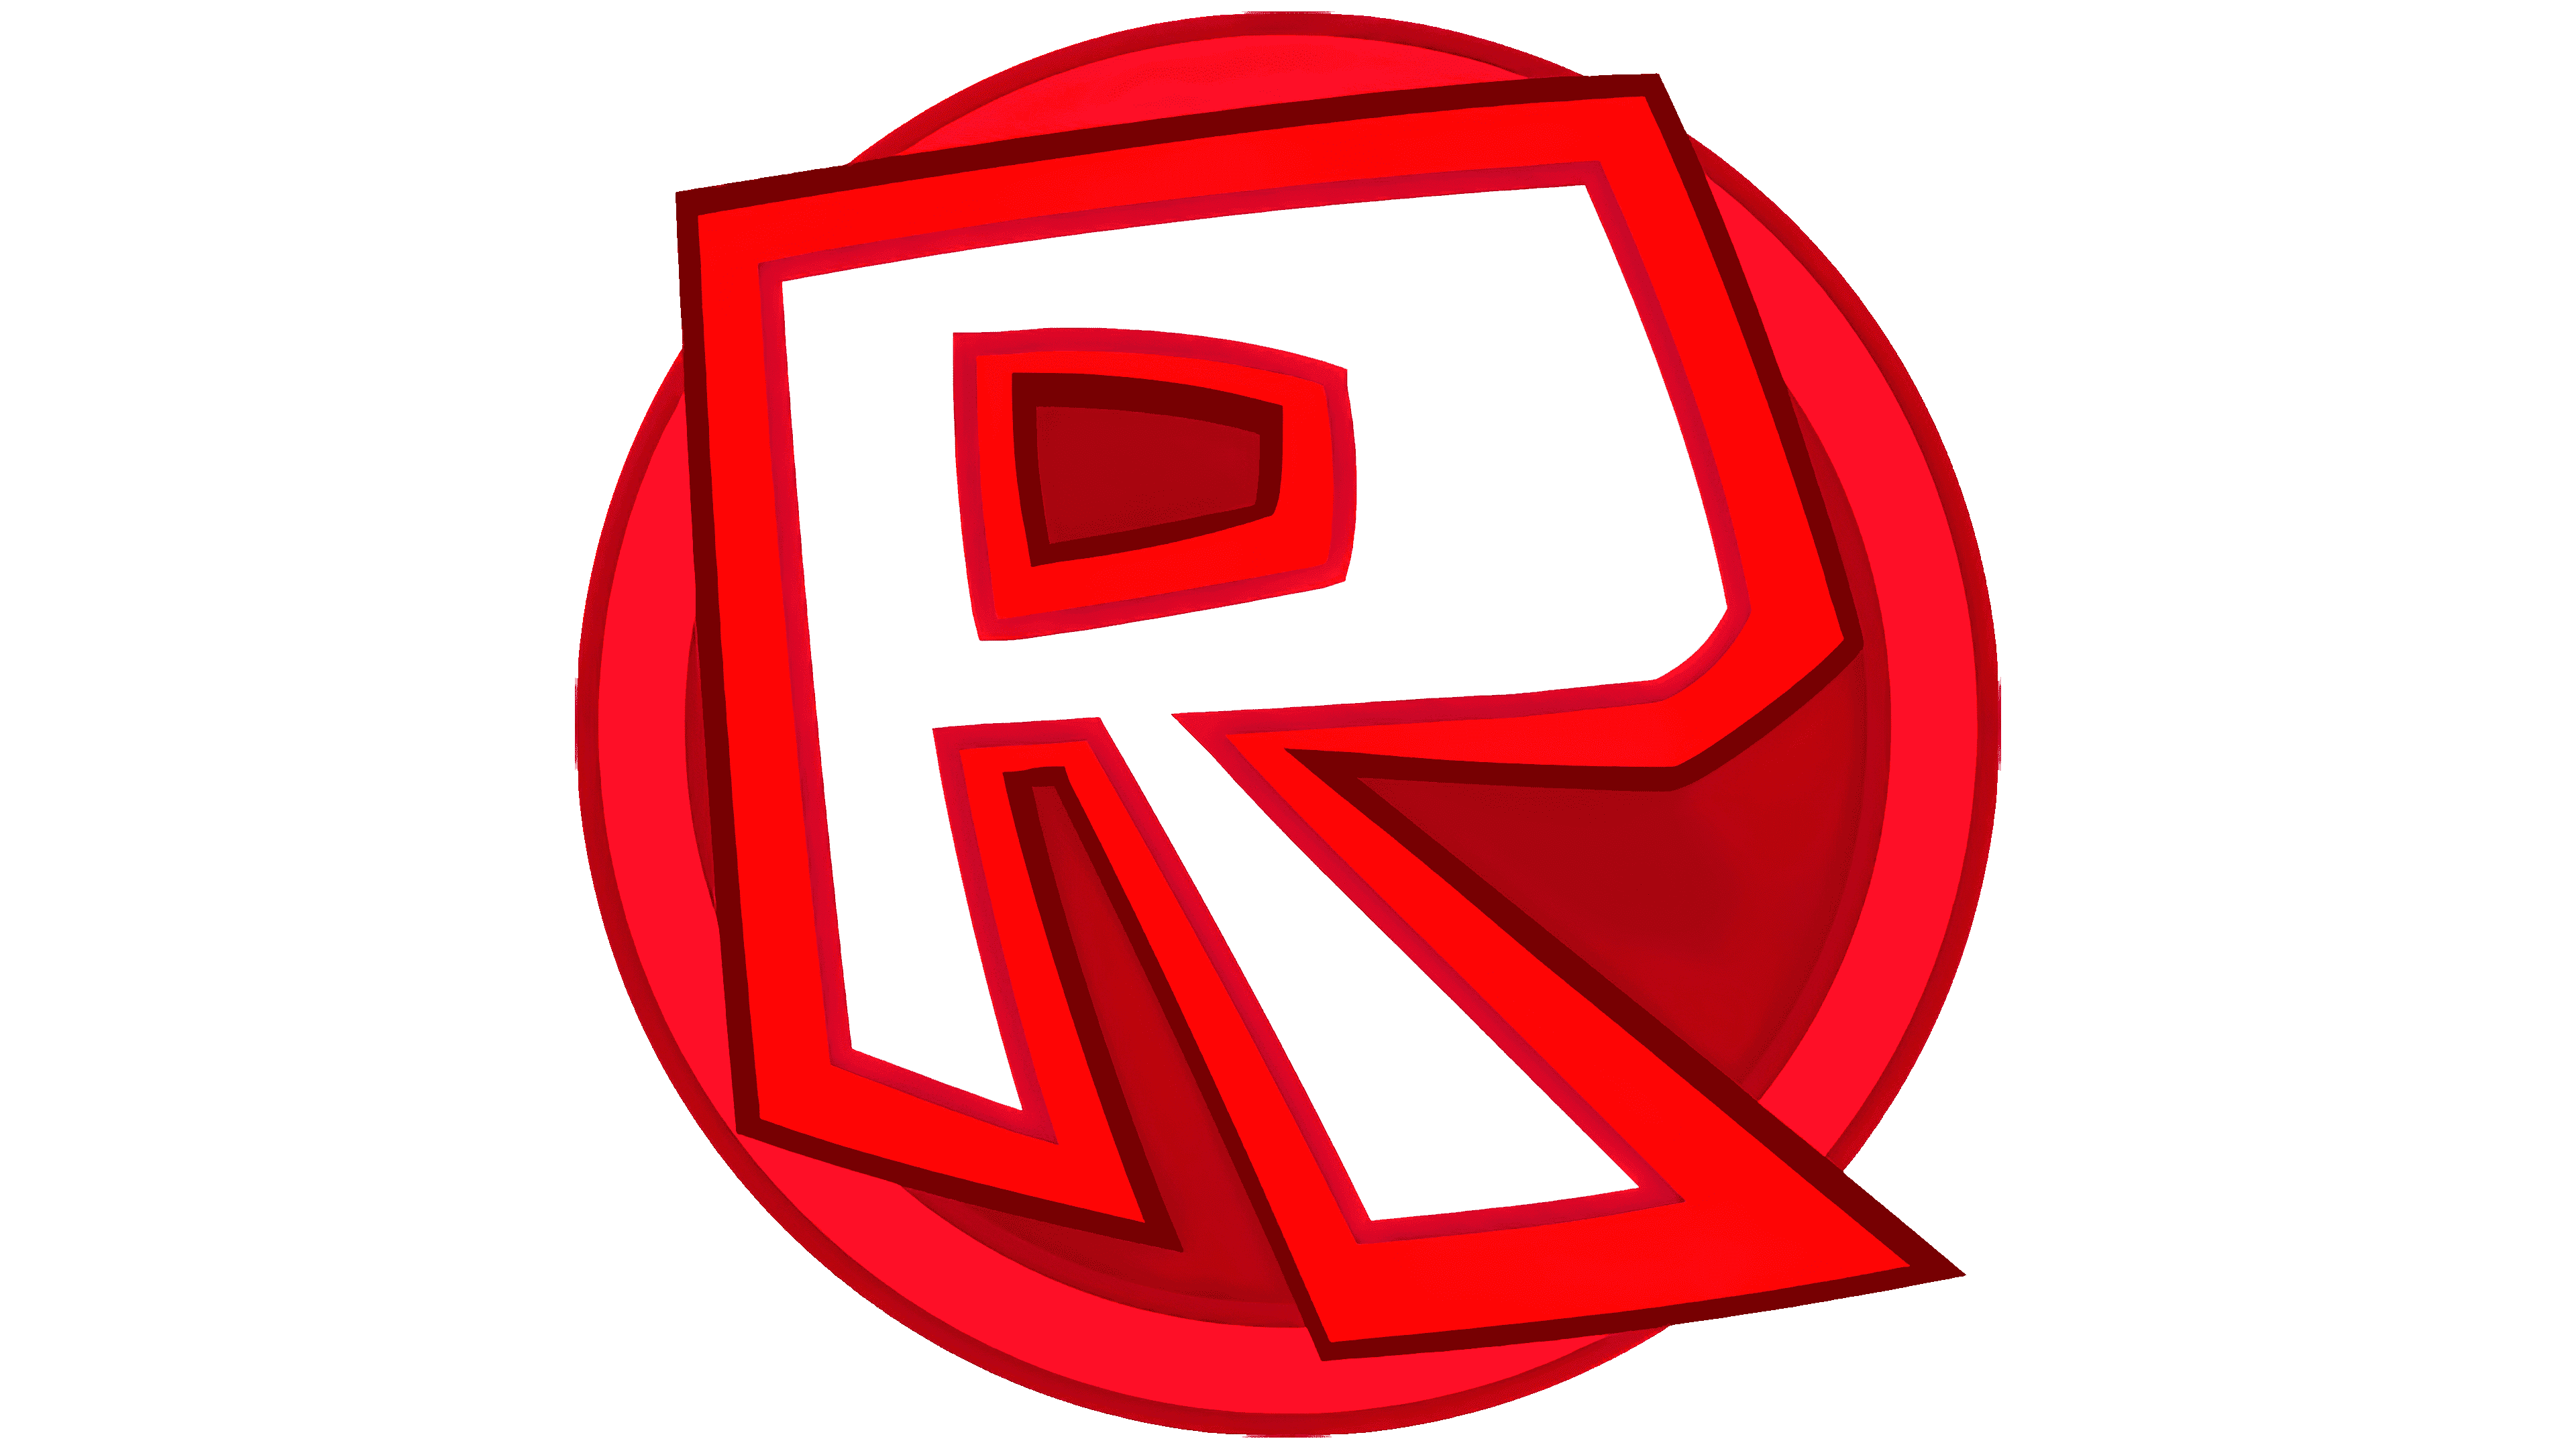 Roblox red icon logo  Red icons:), Phone design, Red aesthetic